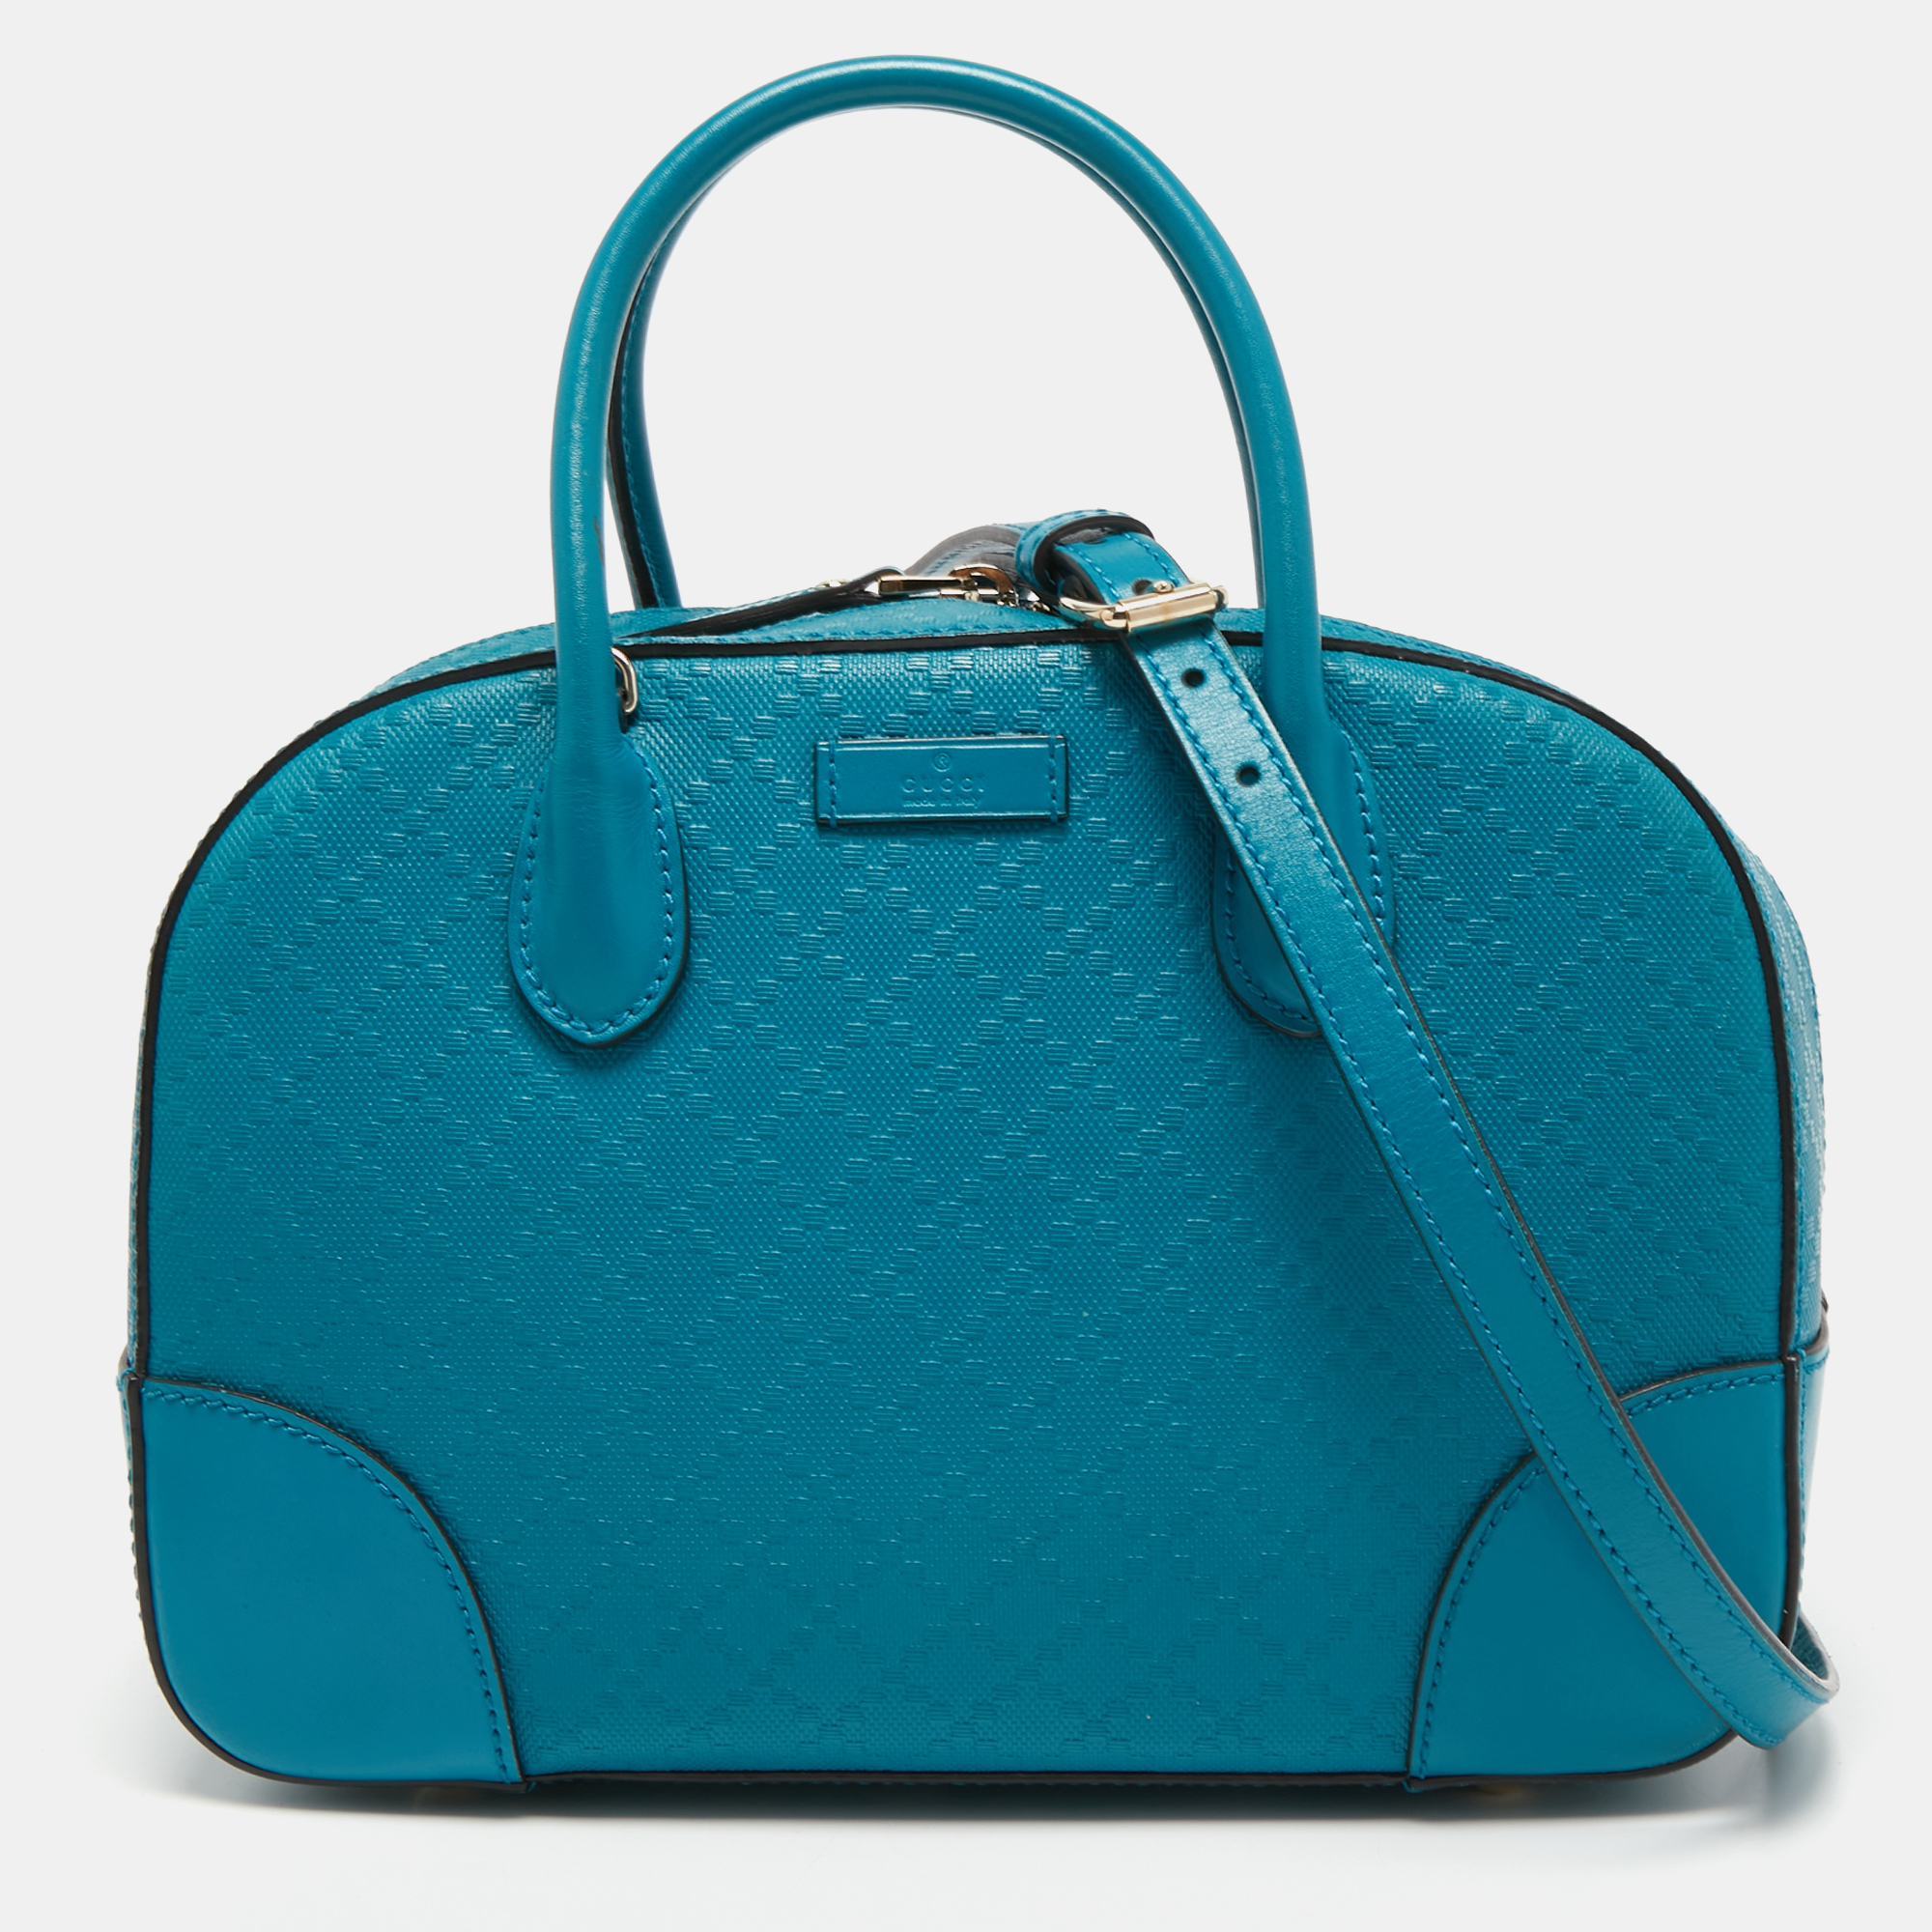 Pre-owned Gucci Teal Blue Bright Diamante Leather Small Satchel